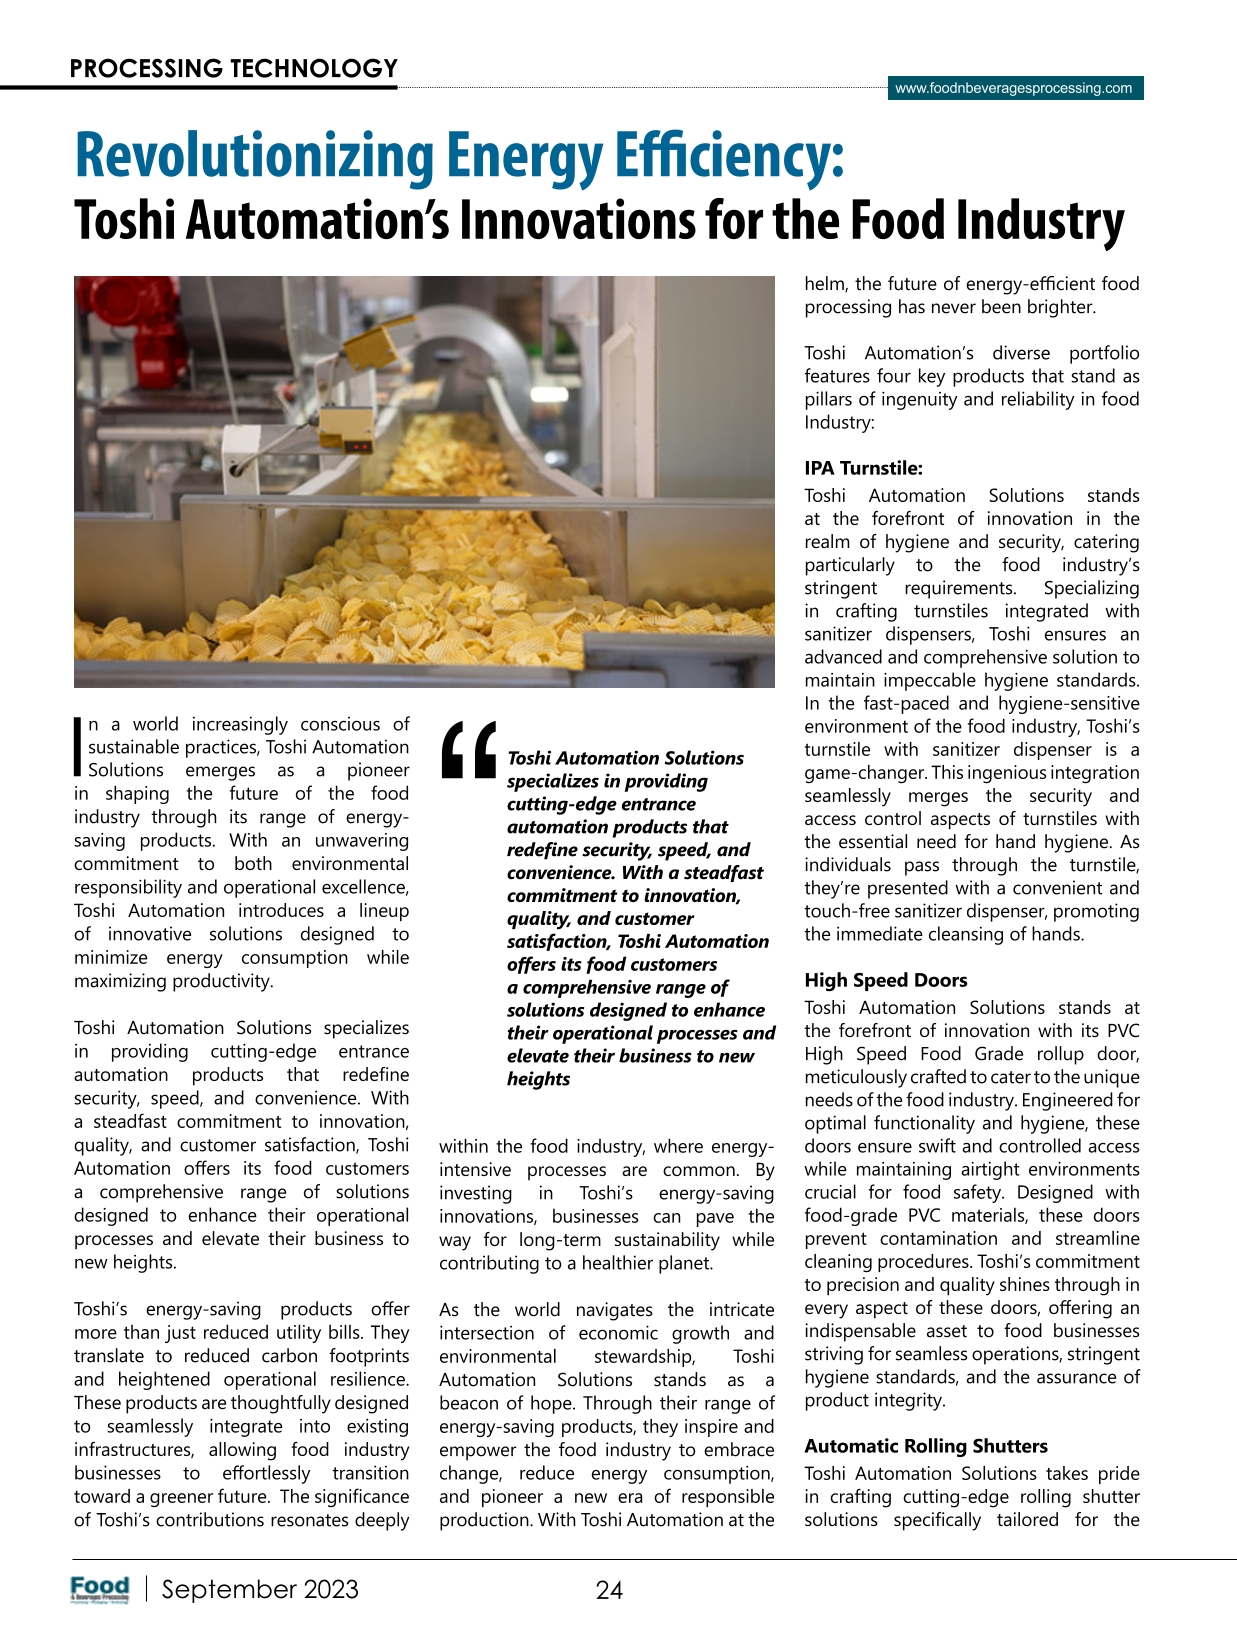 Toshi Automation's Innovations for the food Industry